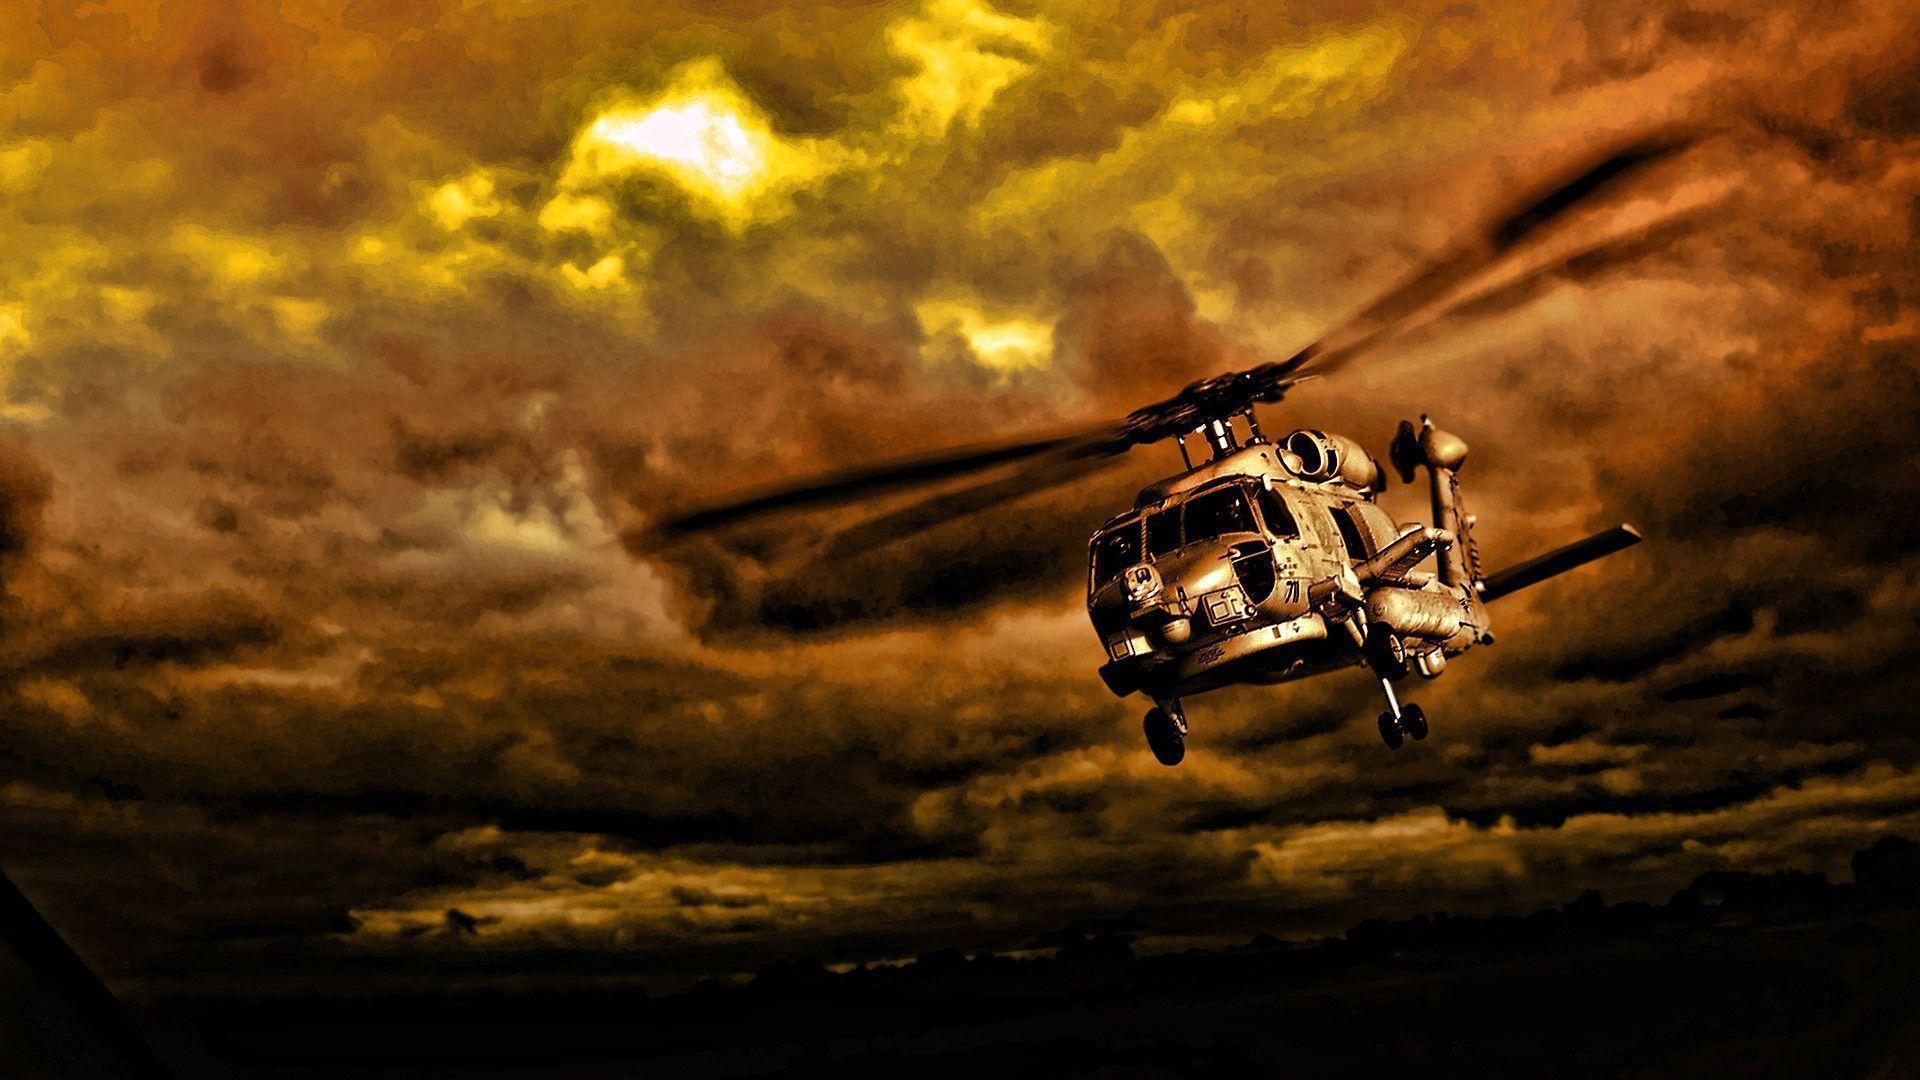 Helicopter Wallpaper